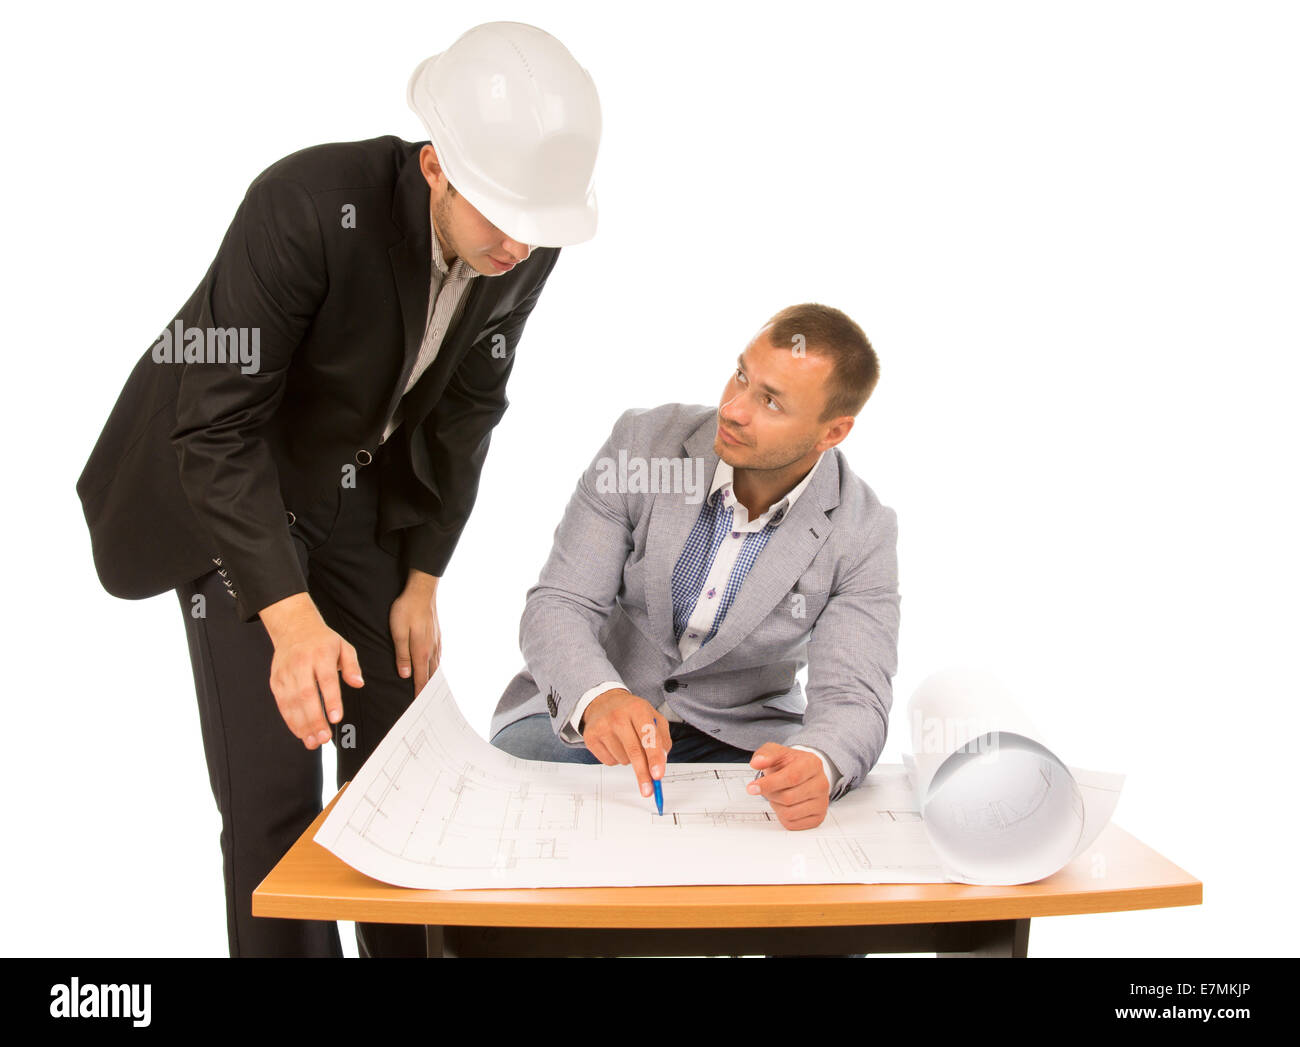 Building foreman and architect discussing a plan or blueprint with one standing looking down and the other seated pointing to a  Stock Photo